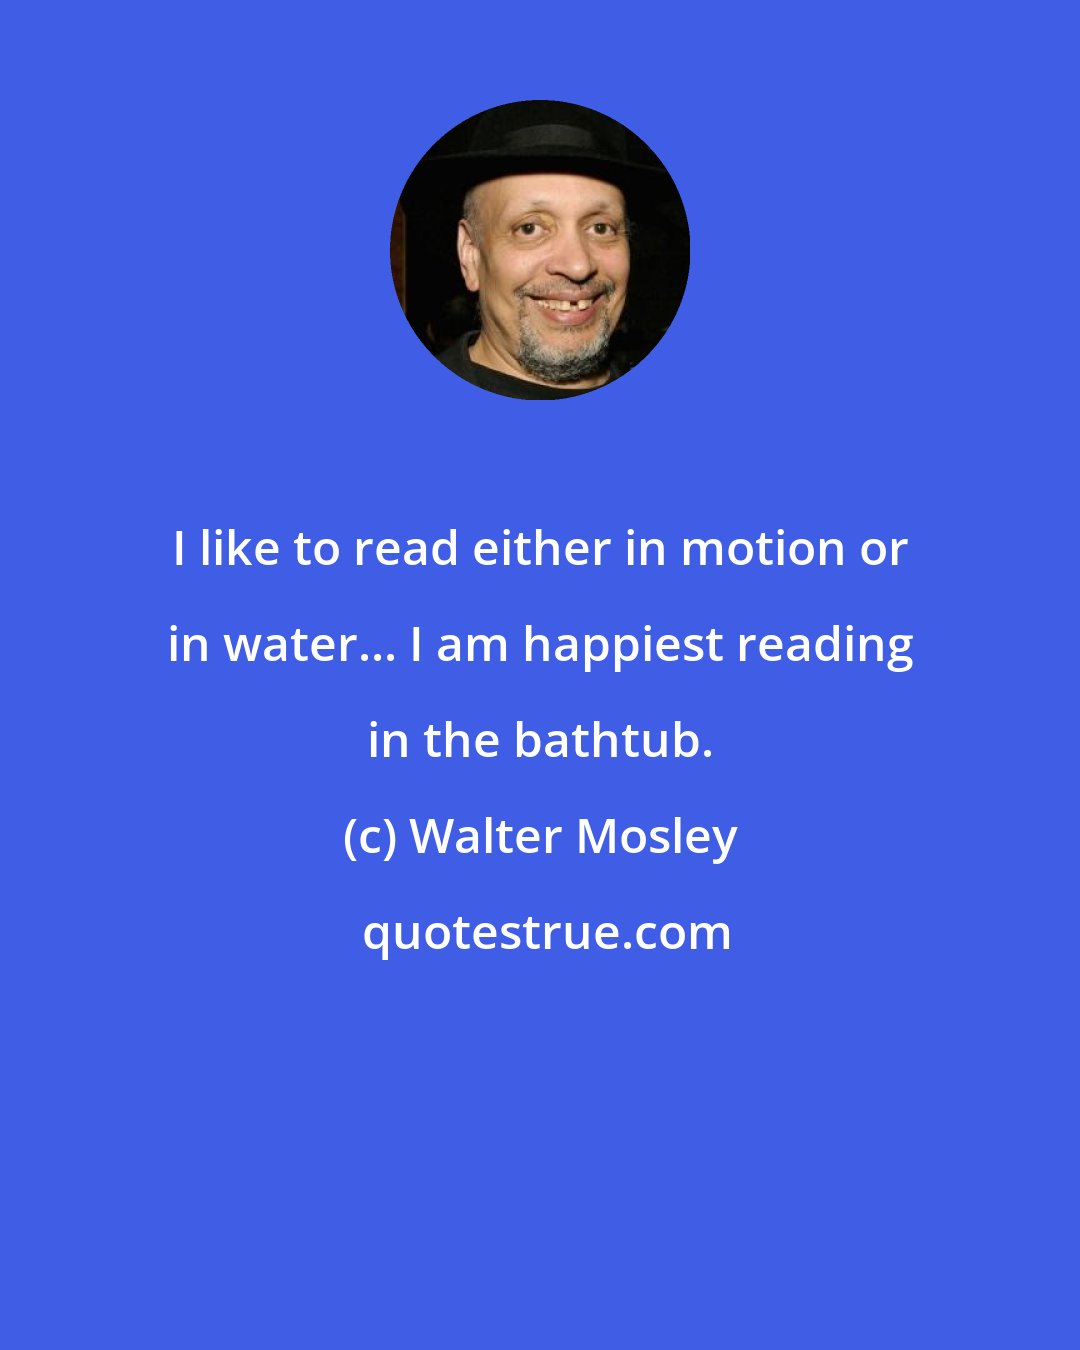 Walter Mosley: I like to read either in motion or in water... I am happiest reading in the bathtub.